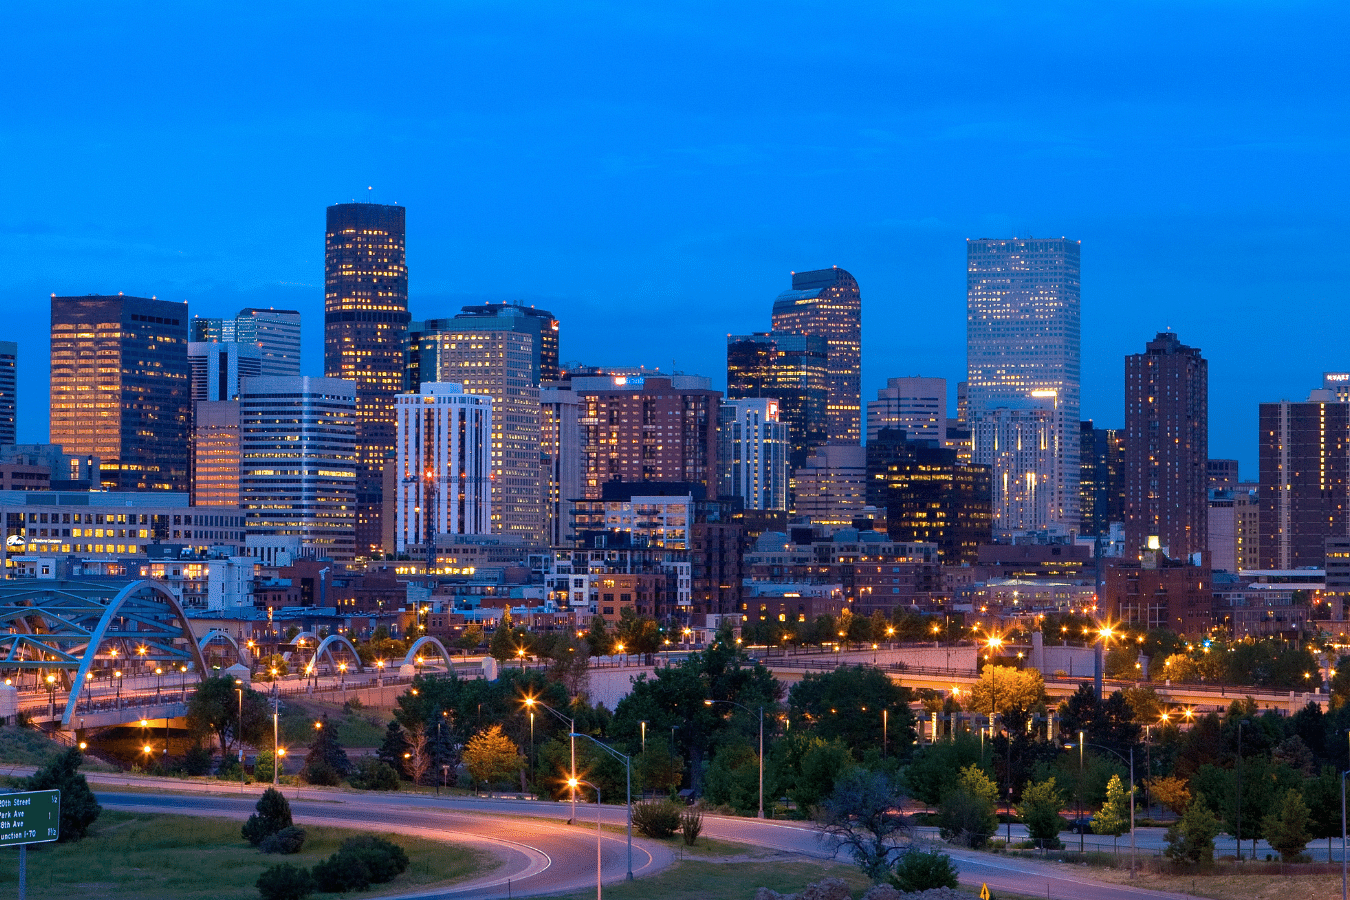 Photo of Denver, CO at night time